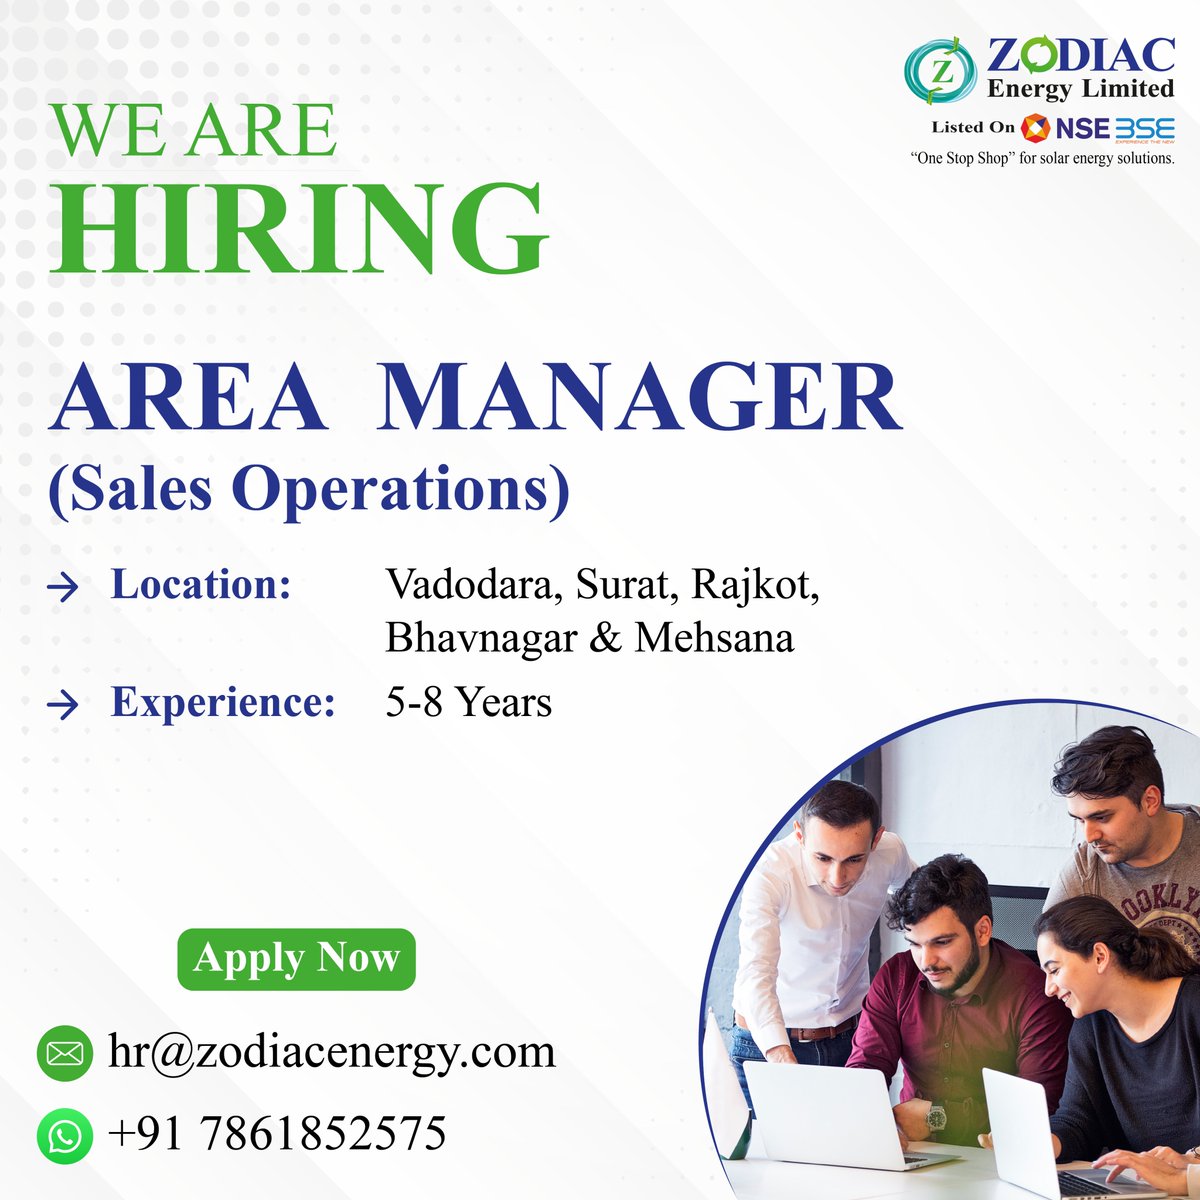 We're hiring an experienced AREA MANAGER (Sales Operations) for multiple locations in Gujarat.

 Send your resume to hr@zodiacenergy.com or WhatsApp us at +91 7861852575.

#SolarPower #RenewableEnergy #CleanEnergy #SalesOperations #AreaManager #GujaratJobs #JobOpening #hiring